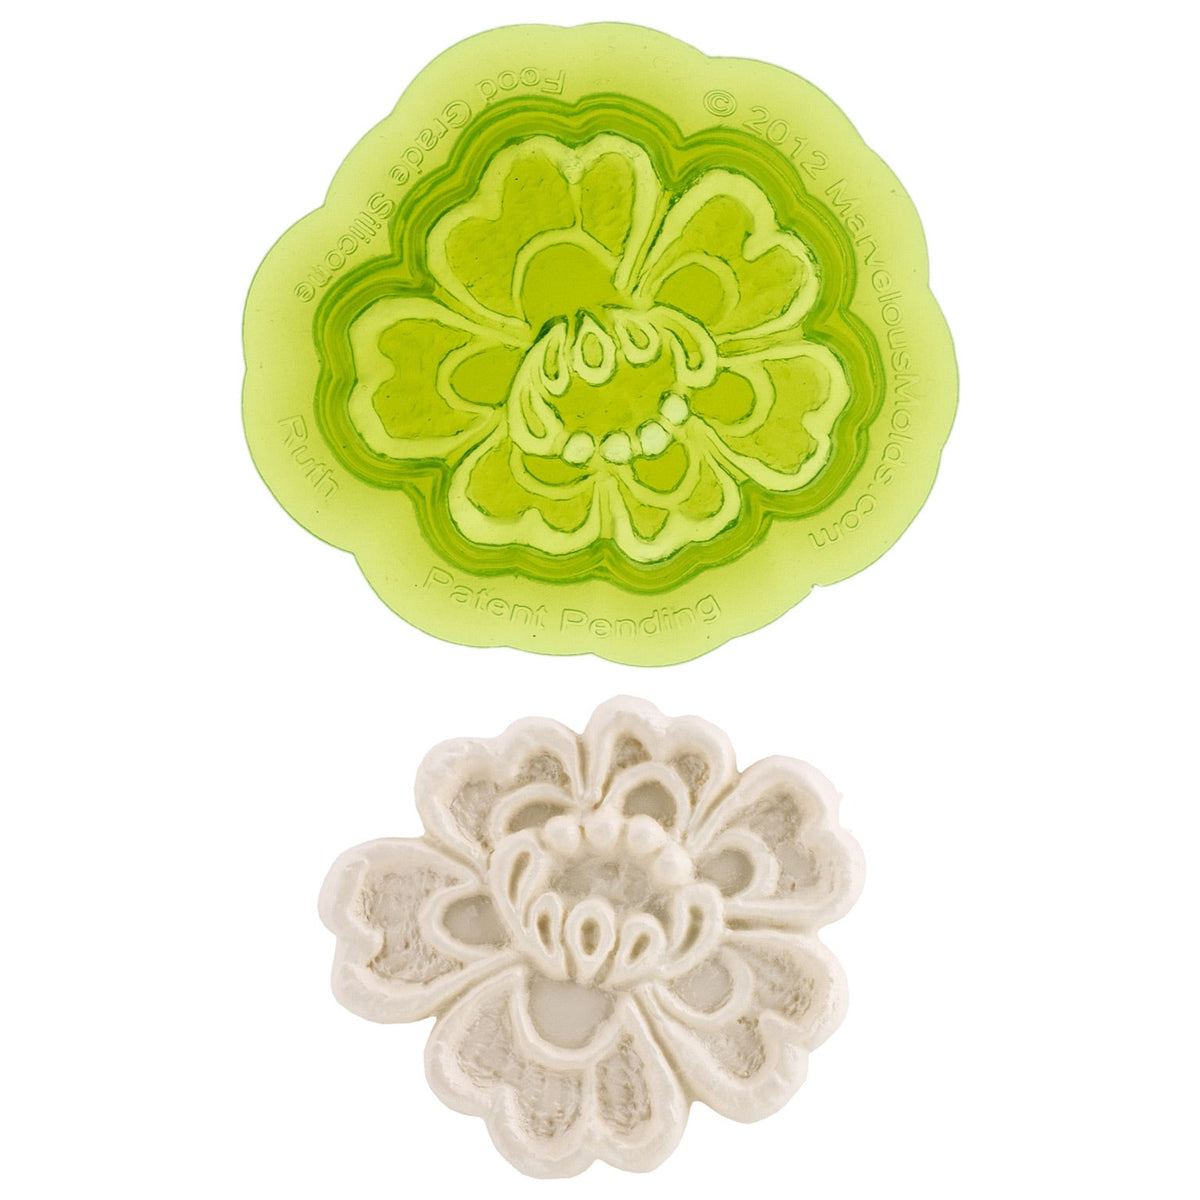 Flower Silicone Mould Fondant Cake and Craft